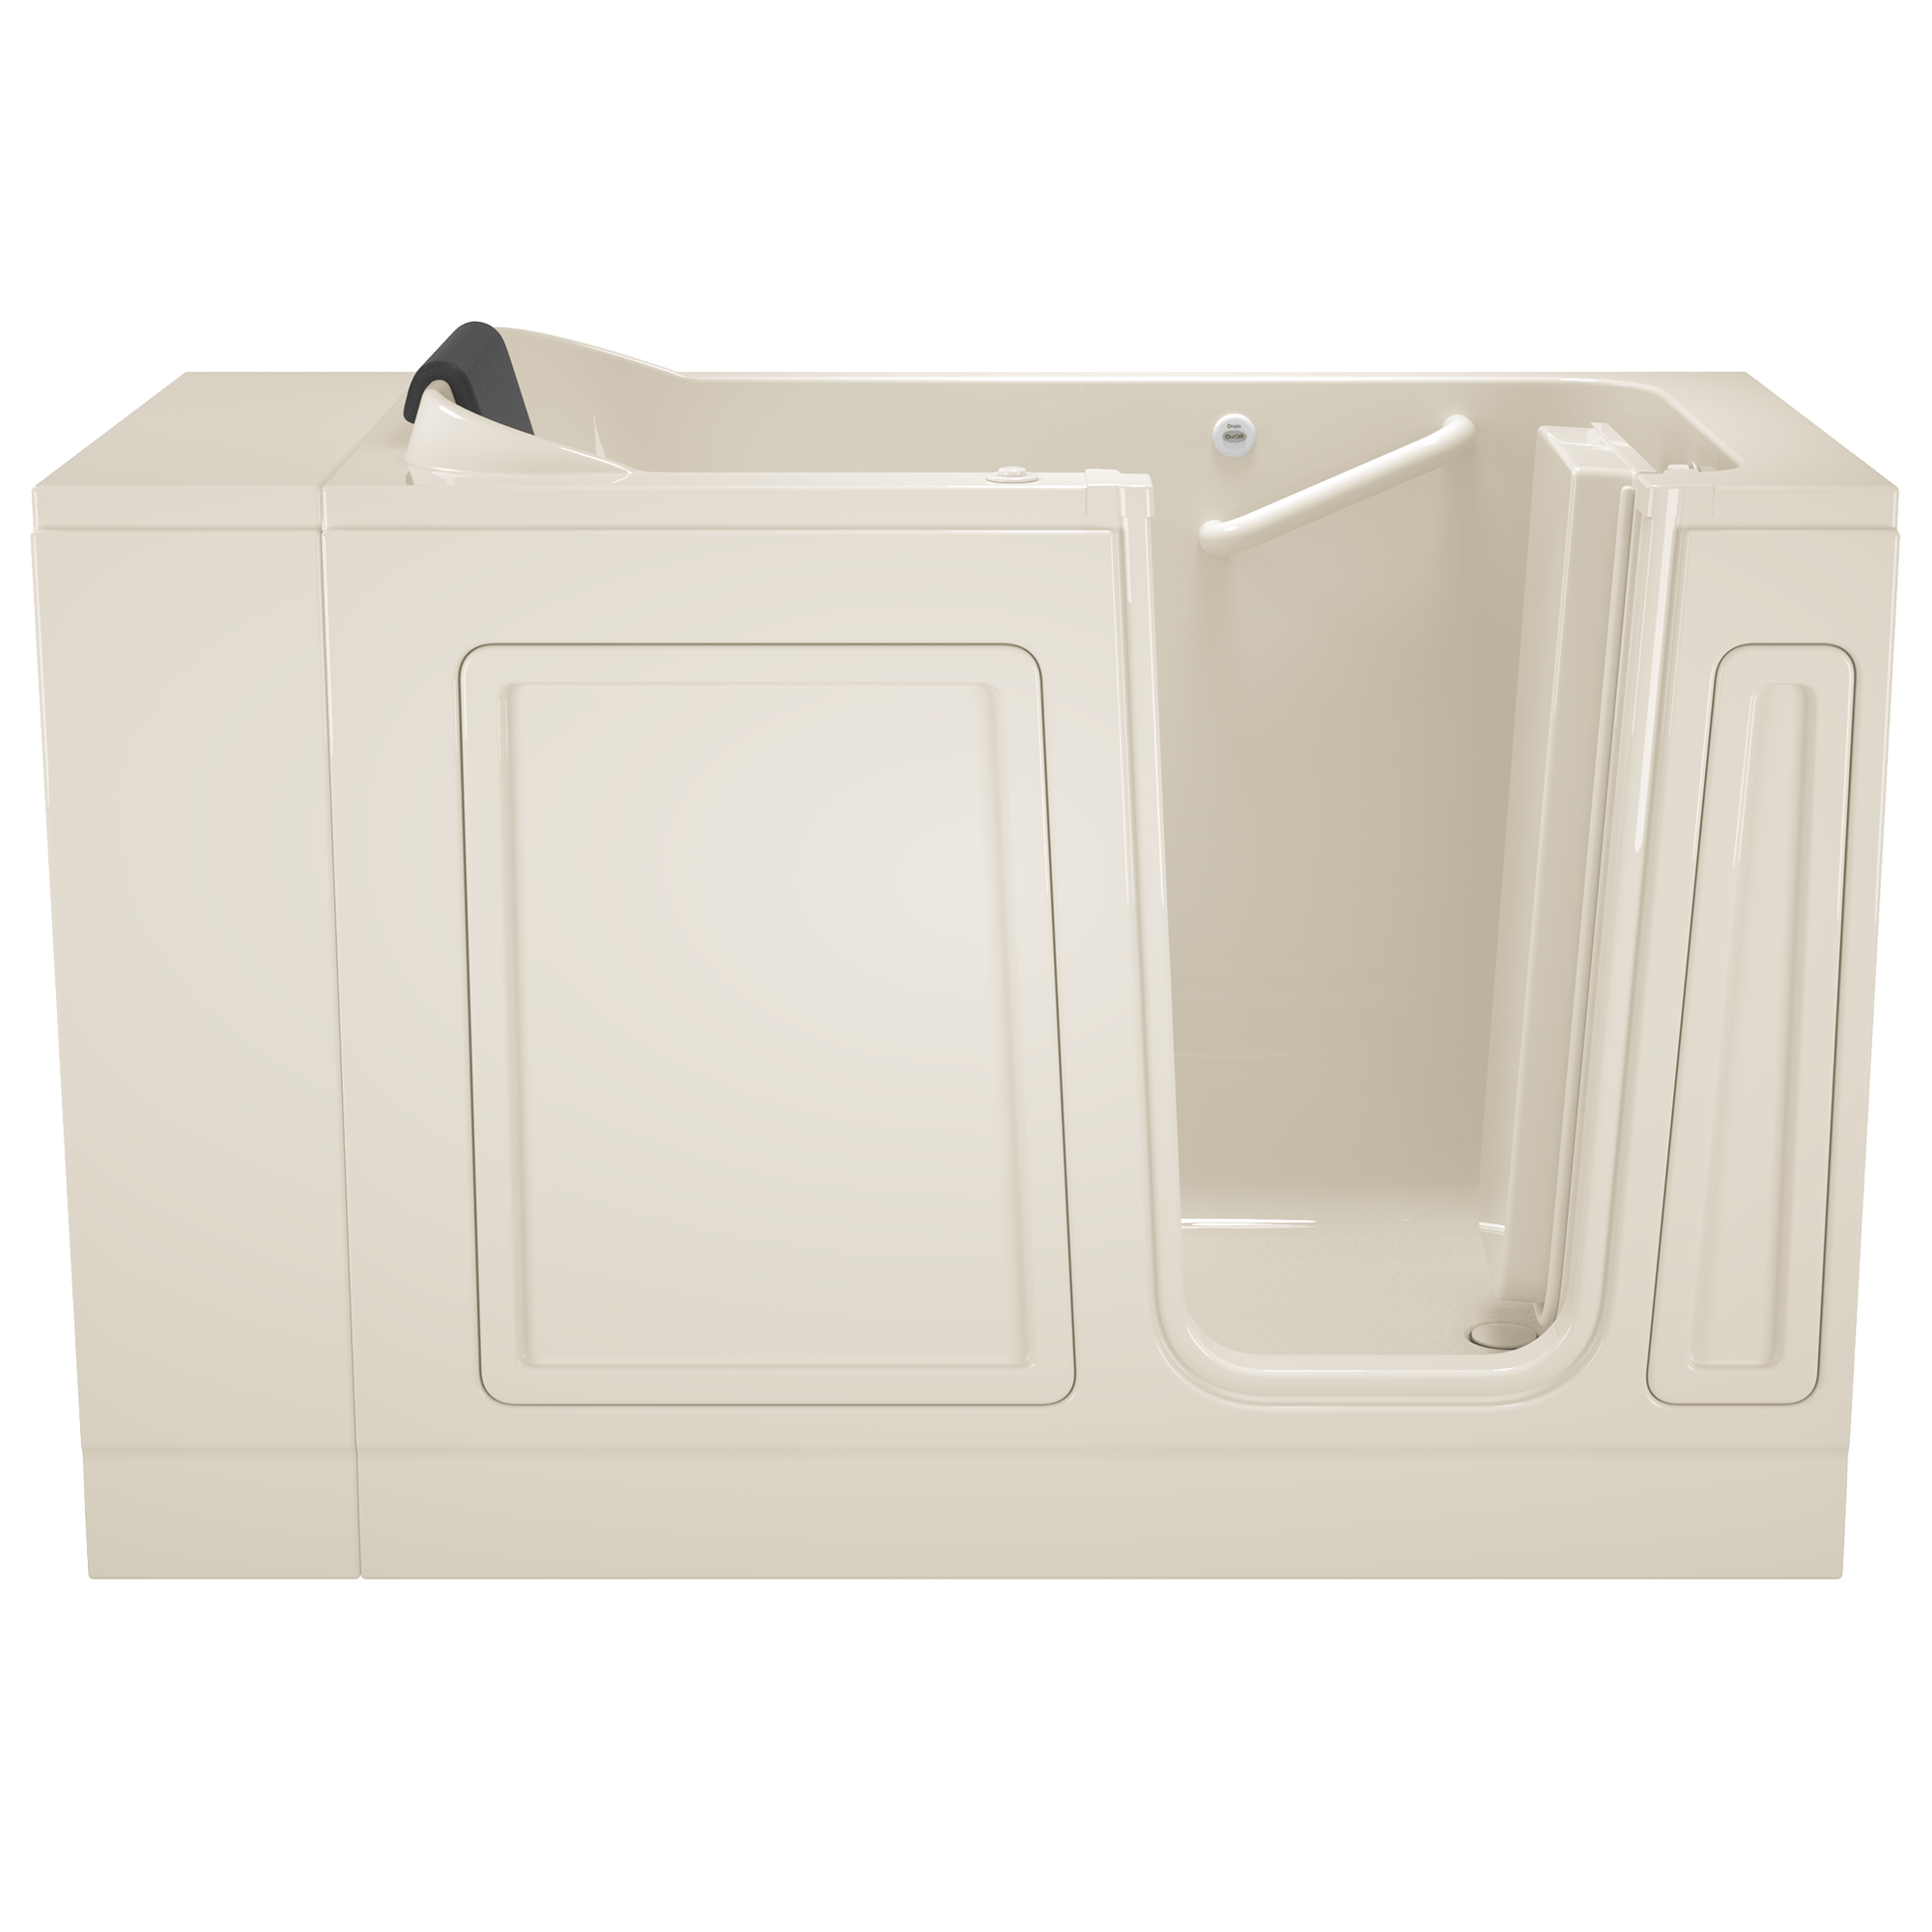 Acrylic Luxury Series 28 x 48-Inch Walk-in Tub With Air Spa System - Right-Hand Drain